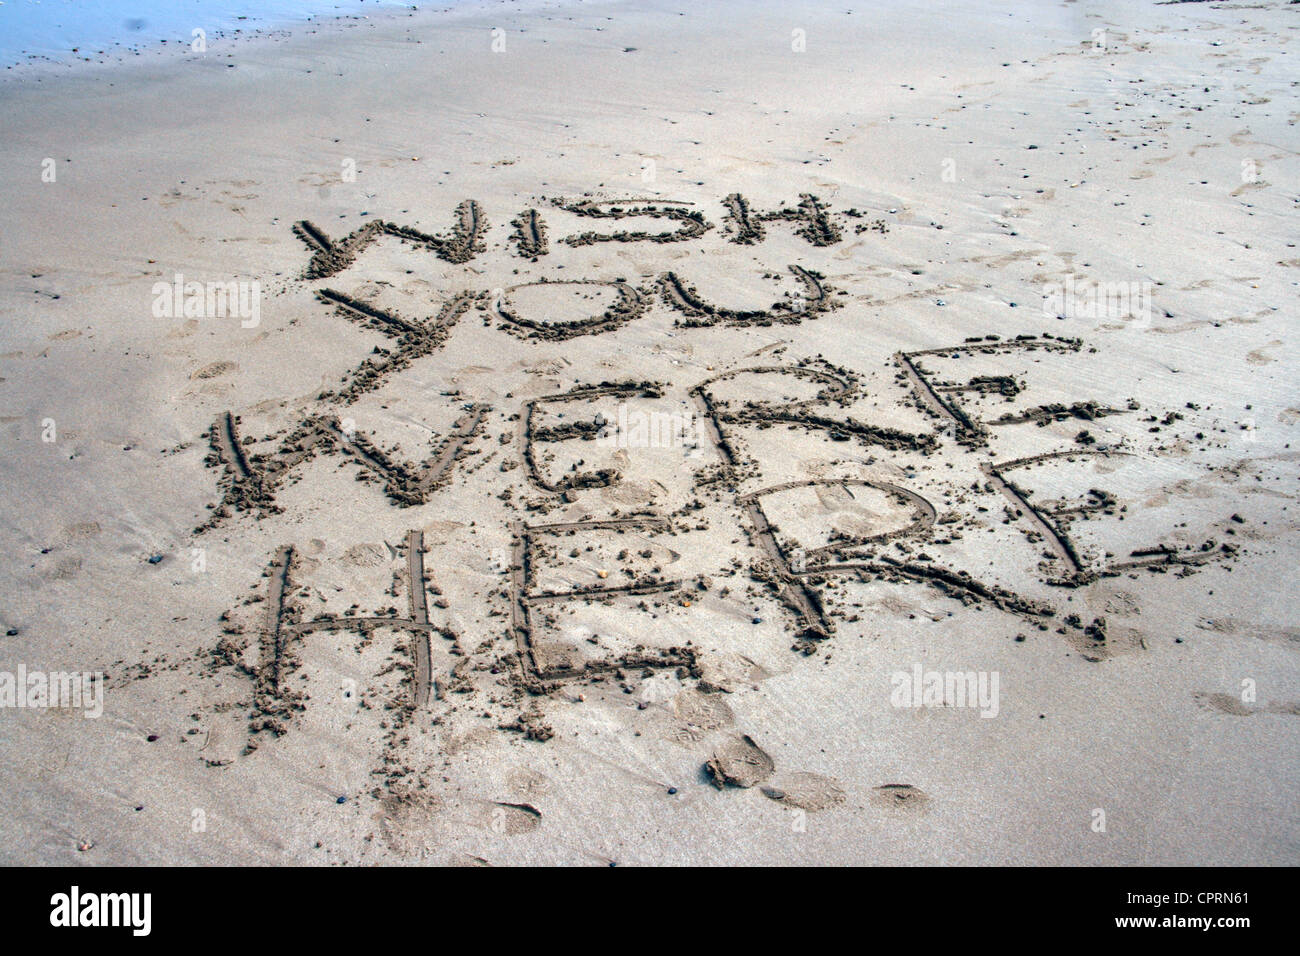 Message written into the sand on a beach, 'Wish you were here'. Stock Photo